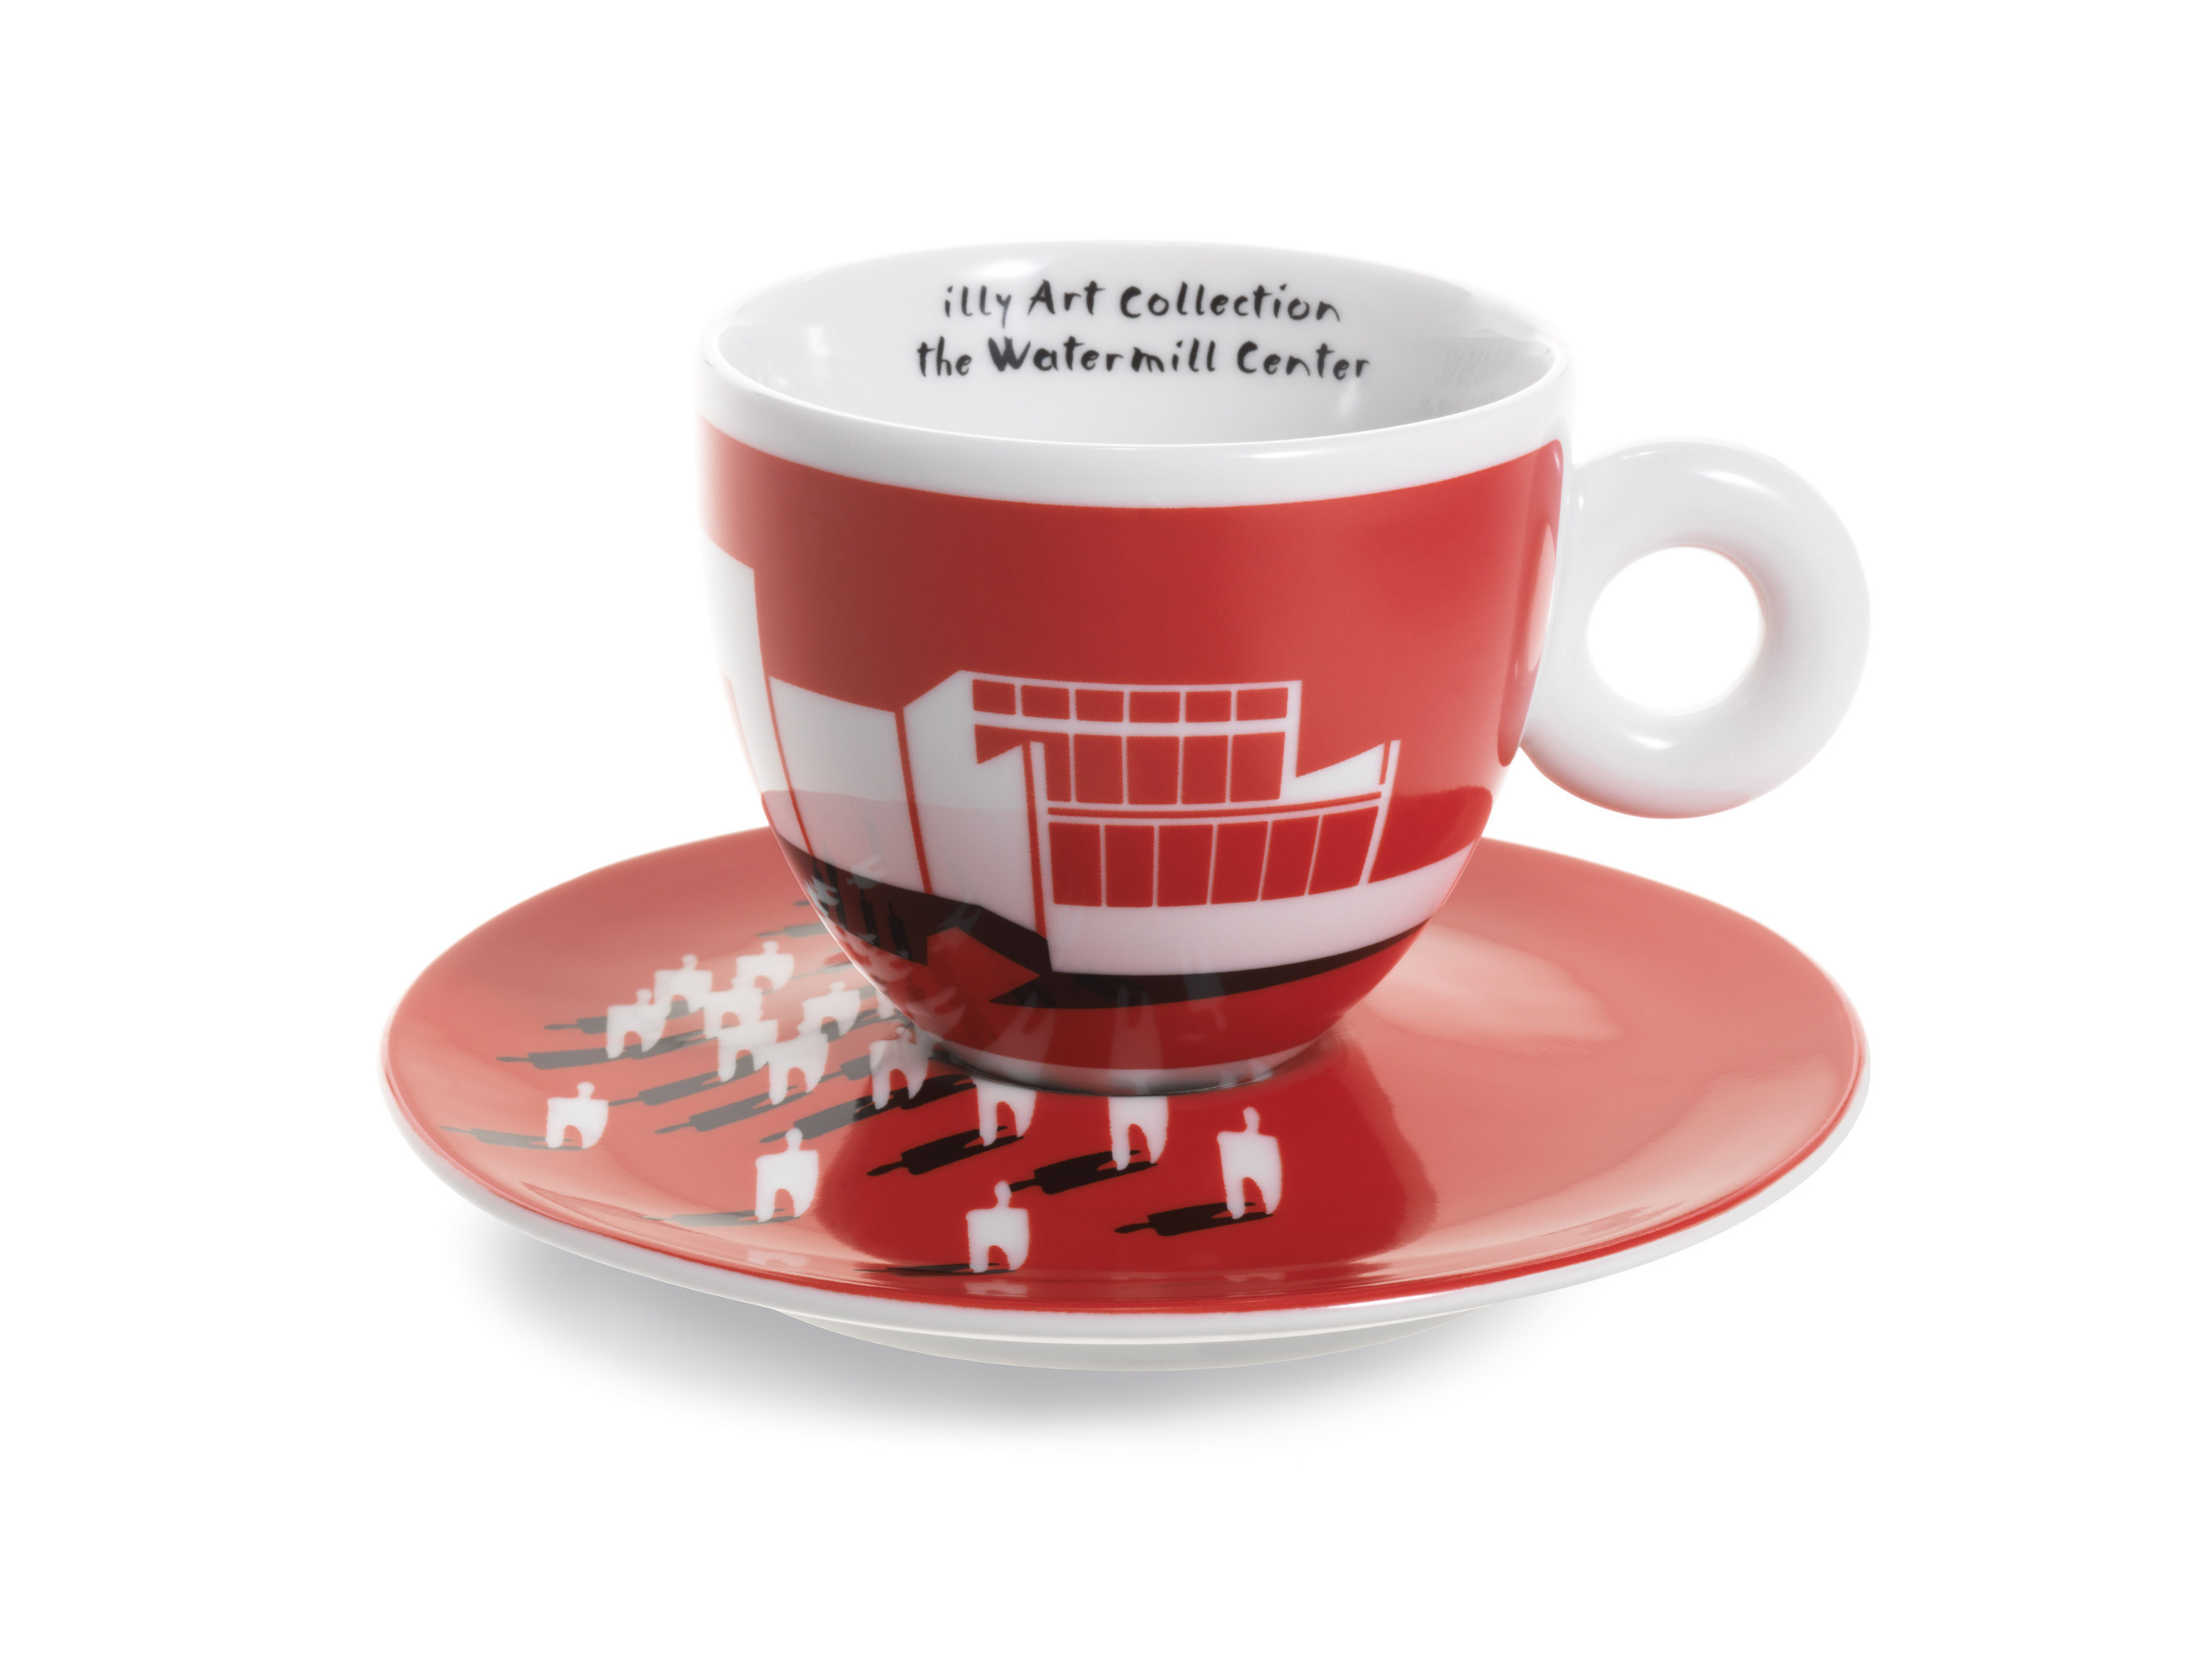 Illy Coffee Partners with Artist Robert Wilson to Launch a Special Edition Cup Collection